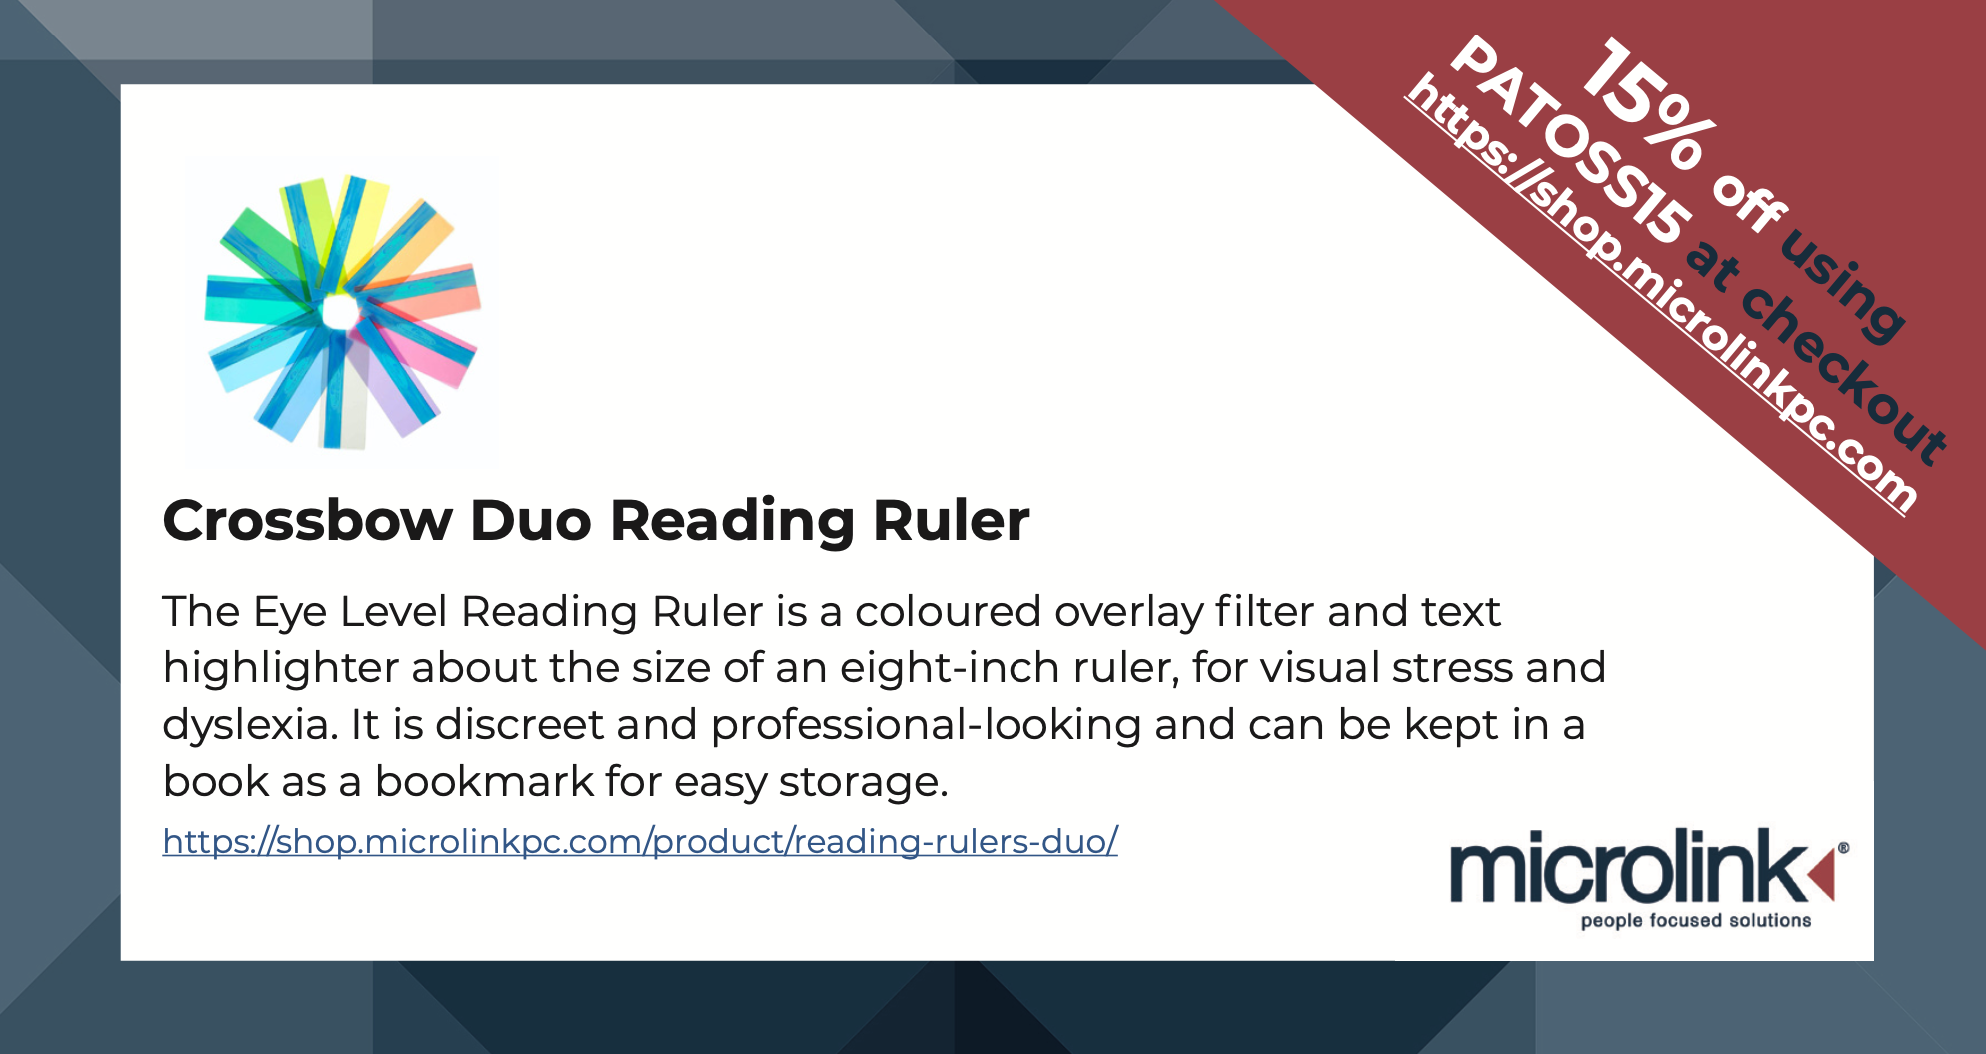 Crossbow Duo Reading Ruler